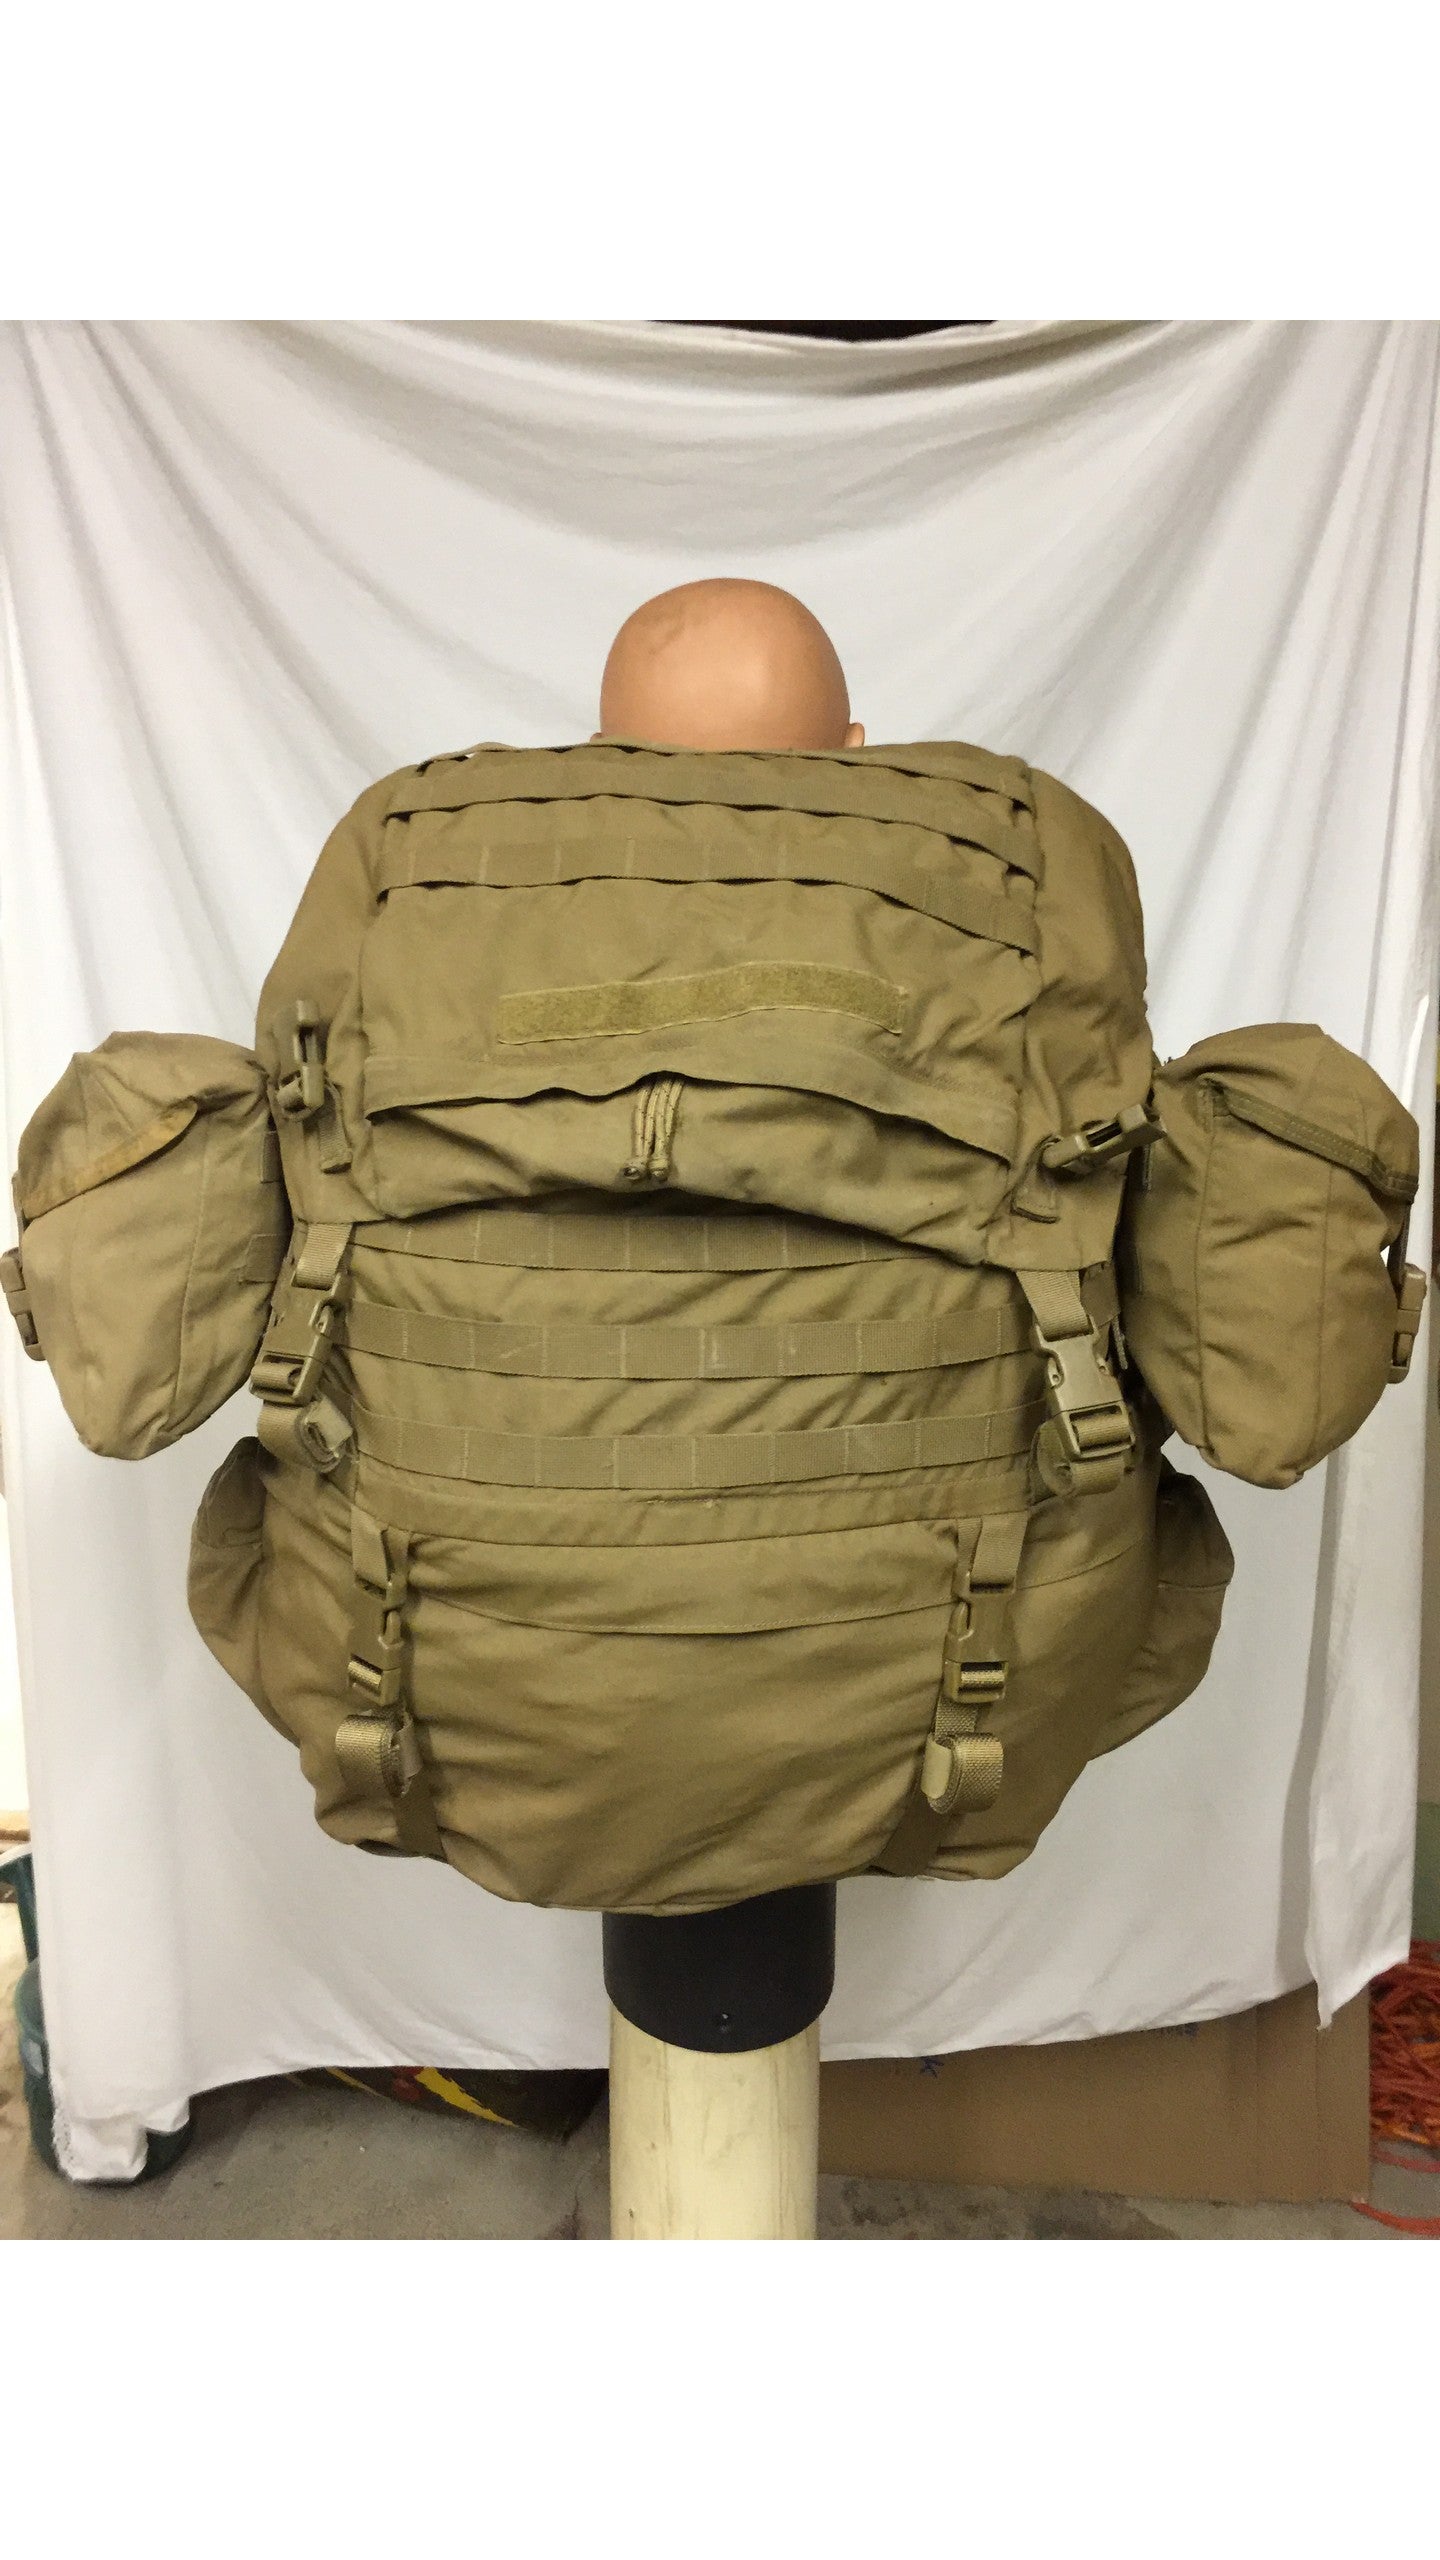 USMC FILBE Coyote complete Main Back Pack rucksack field pack